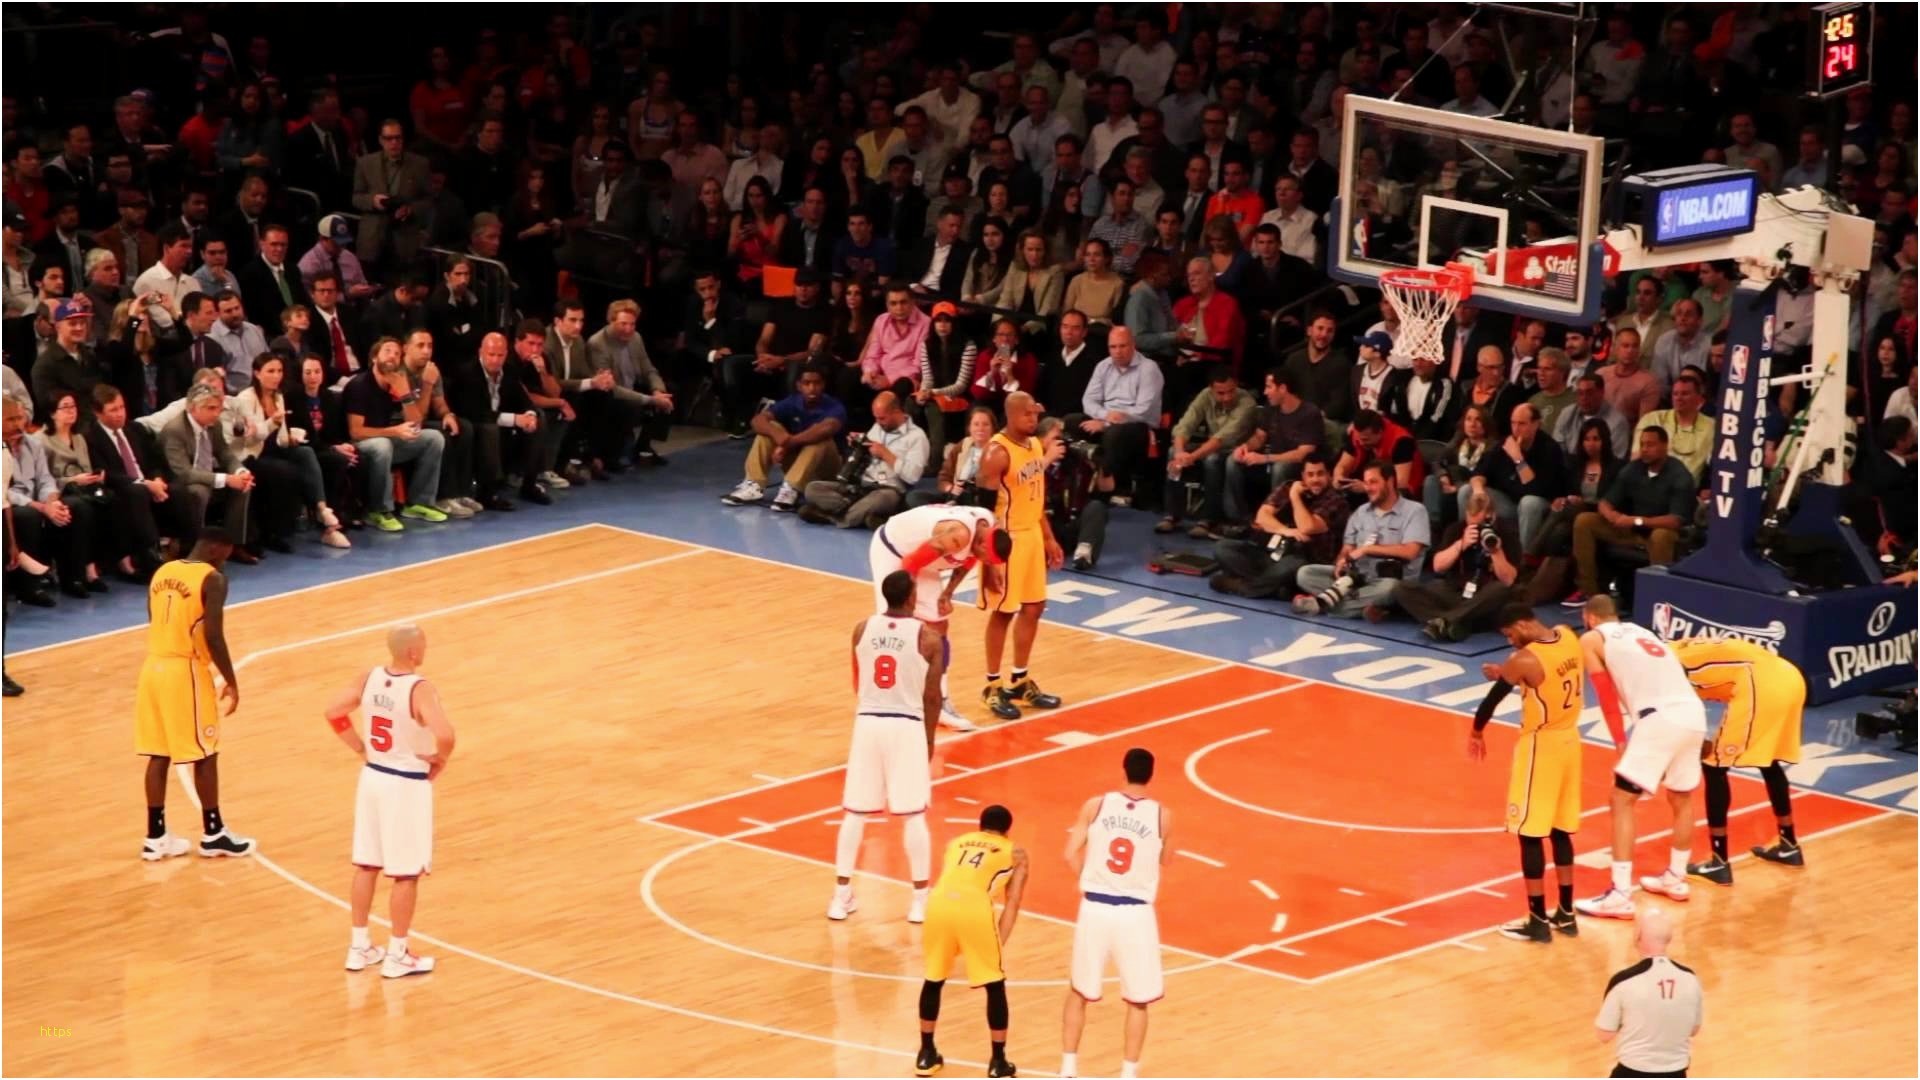 1920x1080 Basketball Court Wallpaper New Jr Smith Free Throws During the 2013  Playoffs Vs Indiana Pacers